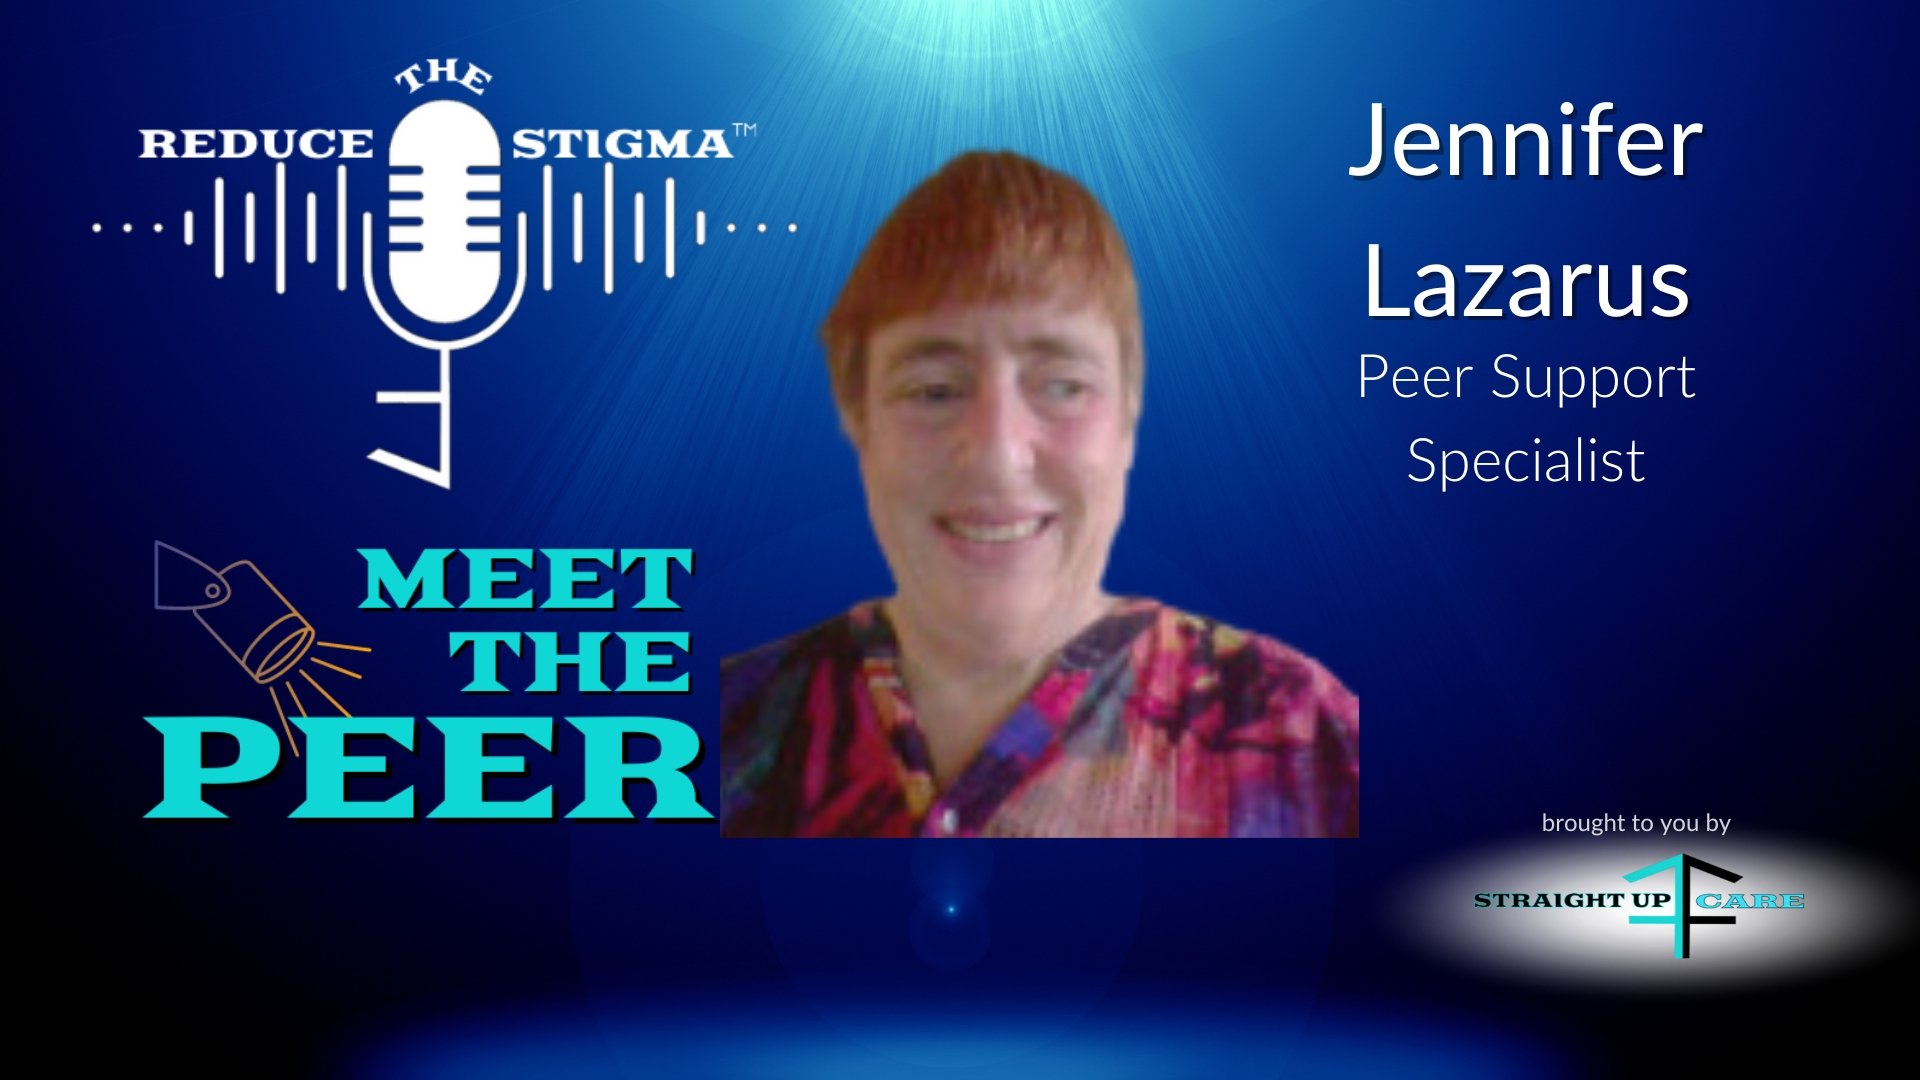 Jennifer Lazarus on Reduce The Stigma - Meet The Peer discusses evolving mental health needs, resilience, advocacy and peer support.